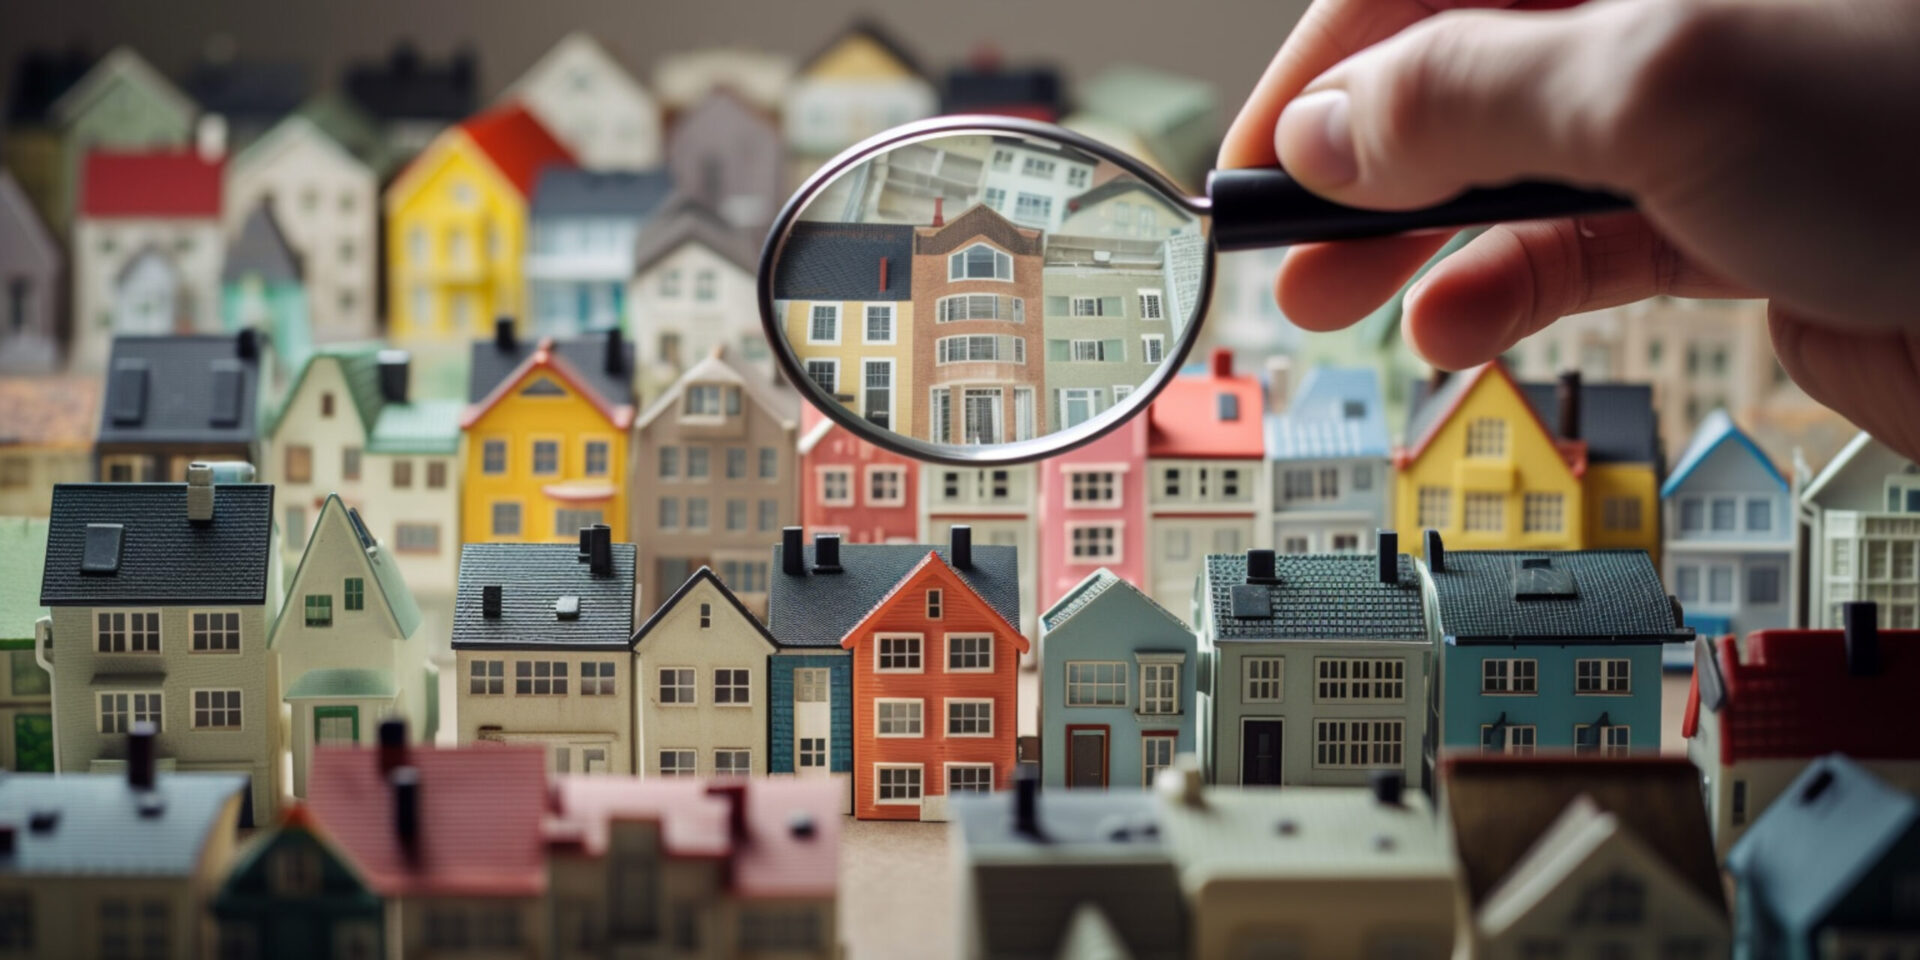 Collage with a magnifying glass and paper houses on hand. Real estate search concept